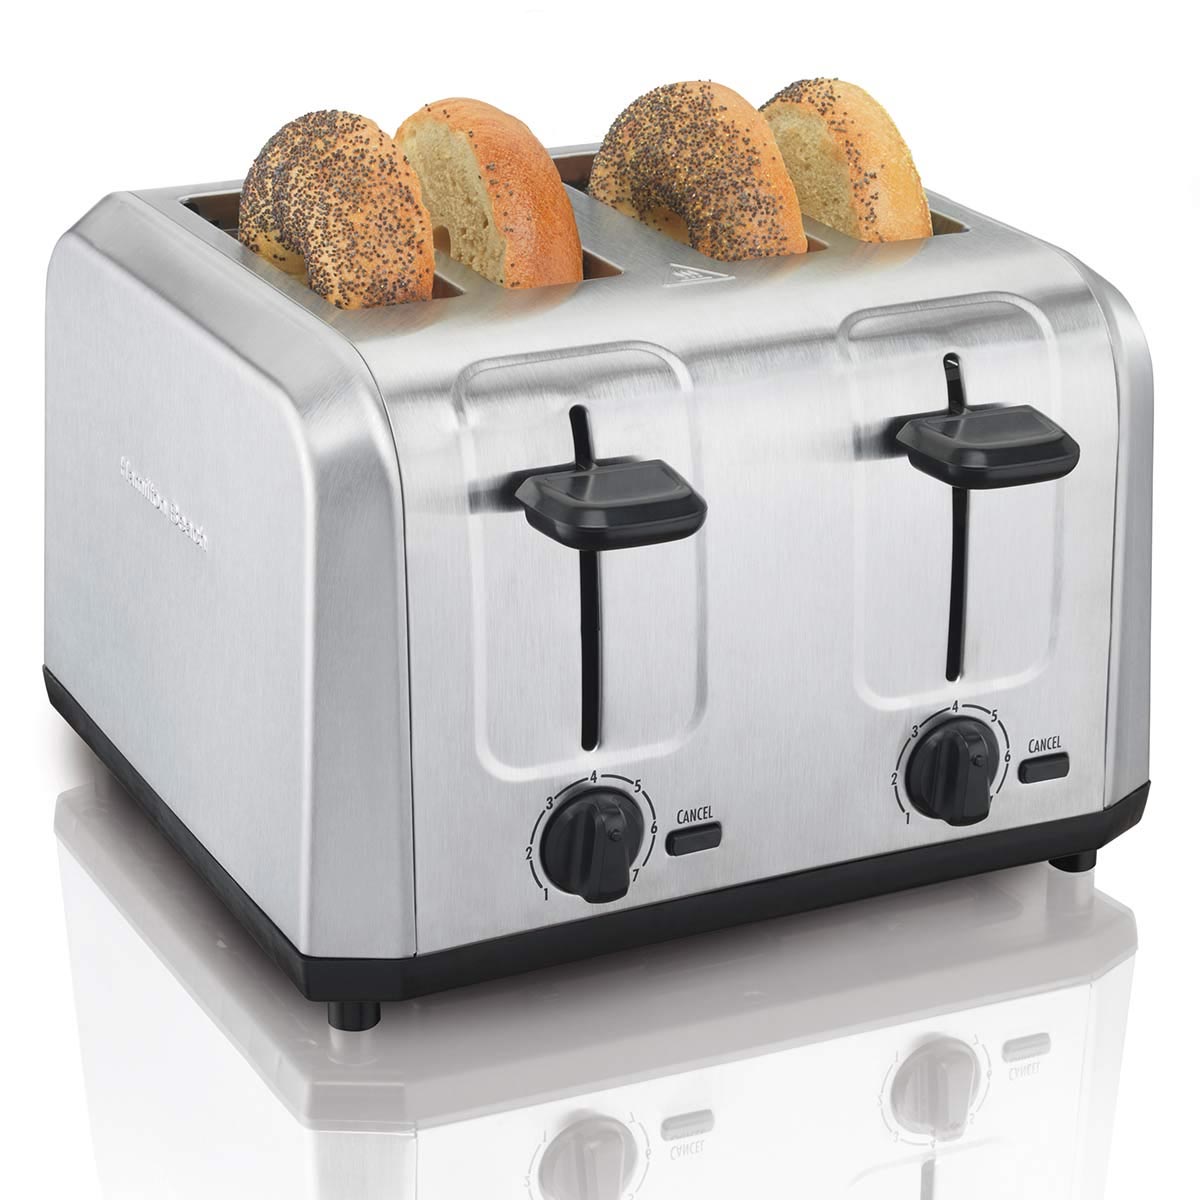 Brushed Stainless Steel 4-Slice Toaster (24910)